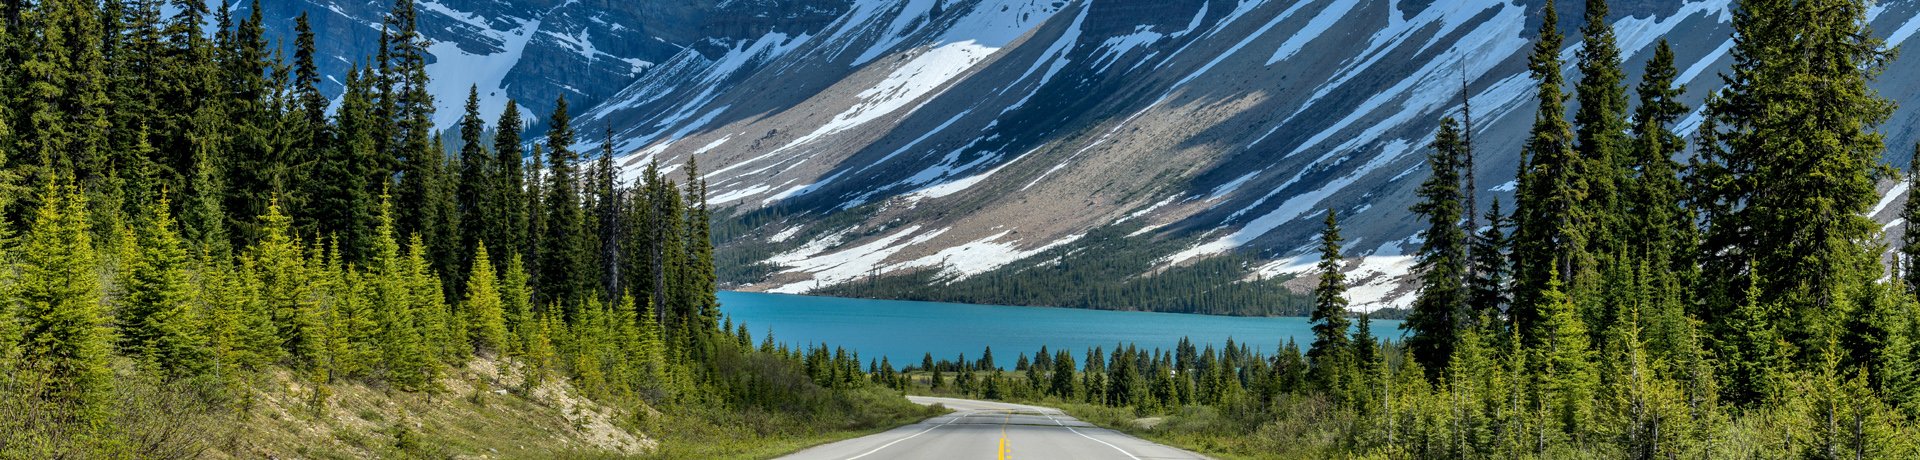 Icefields Parkway, Bow Lake